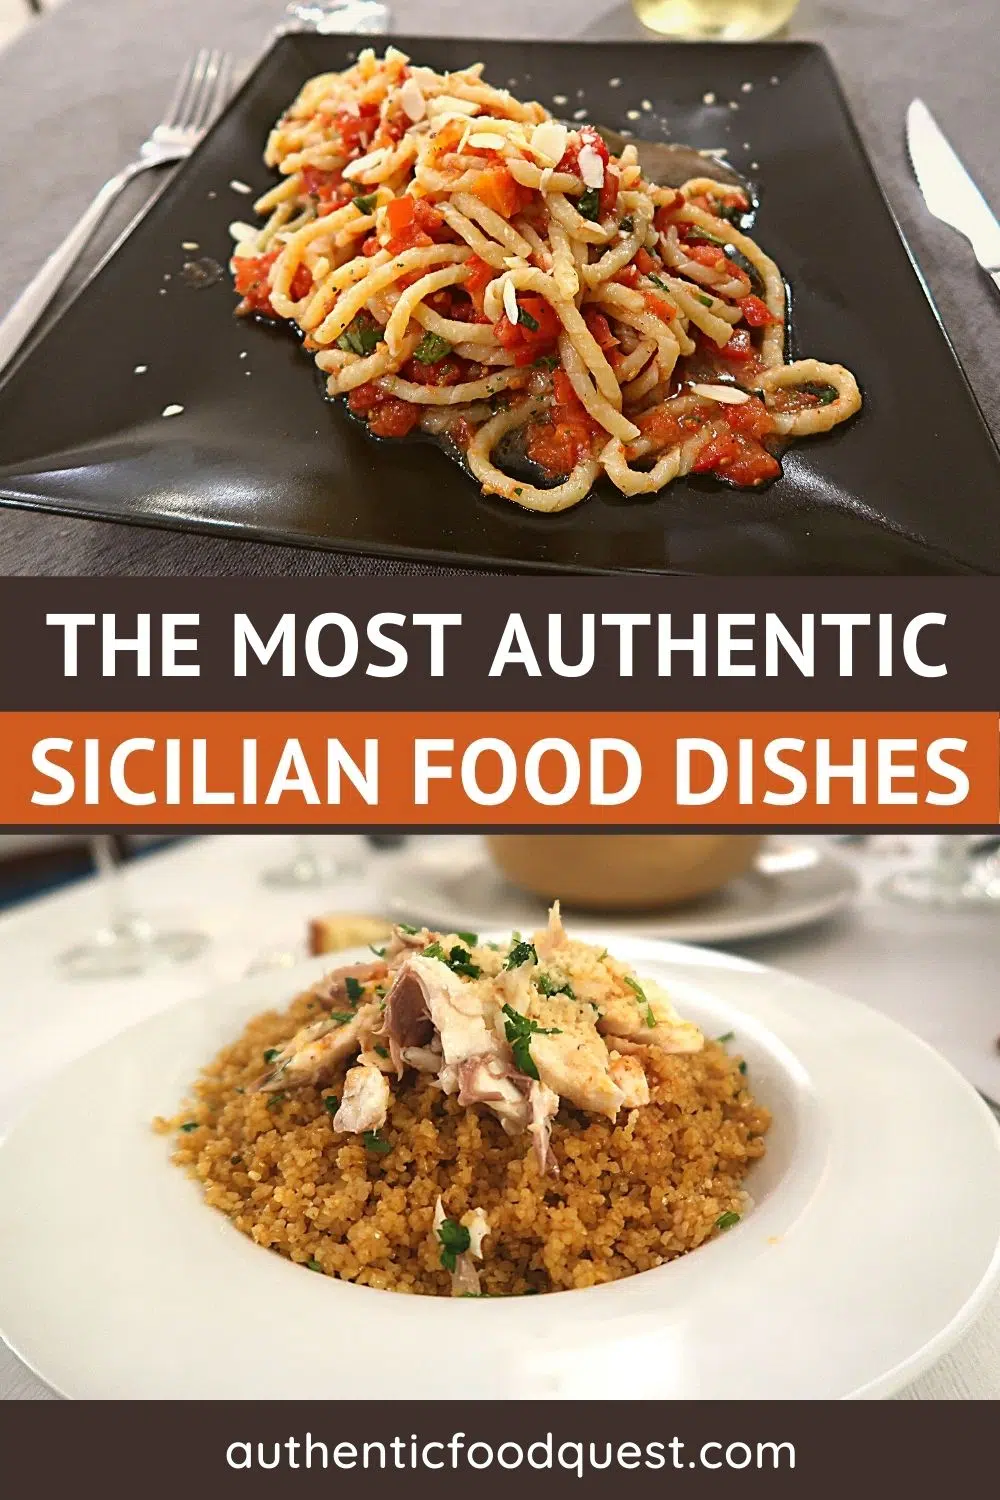 Eating the Arab Roots of Sicilian Cuisine